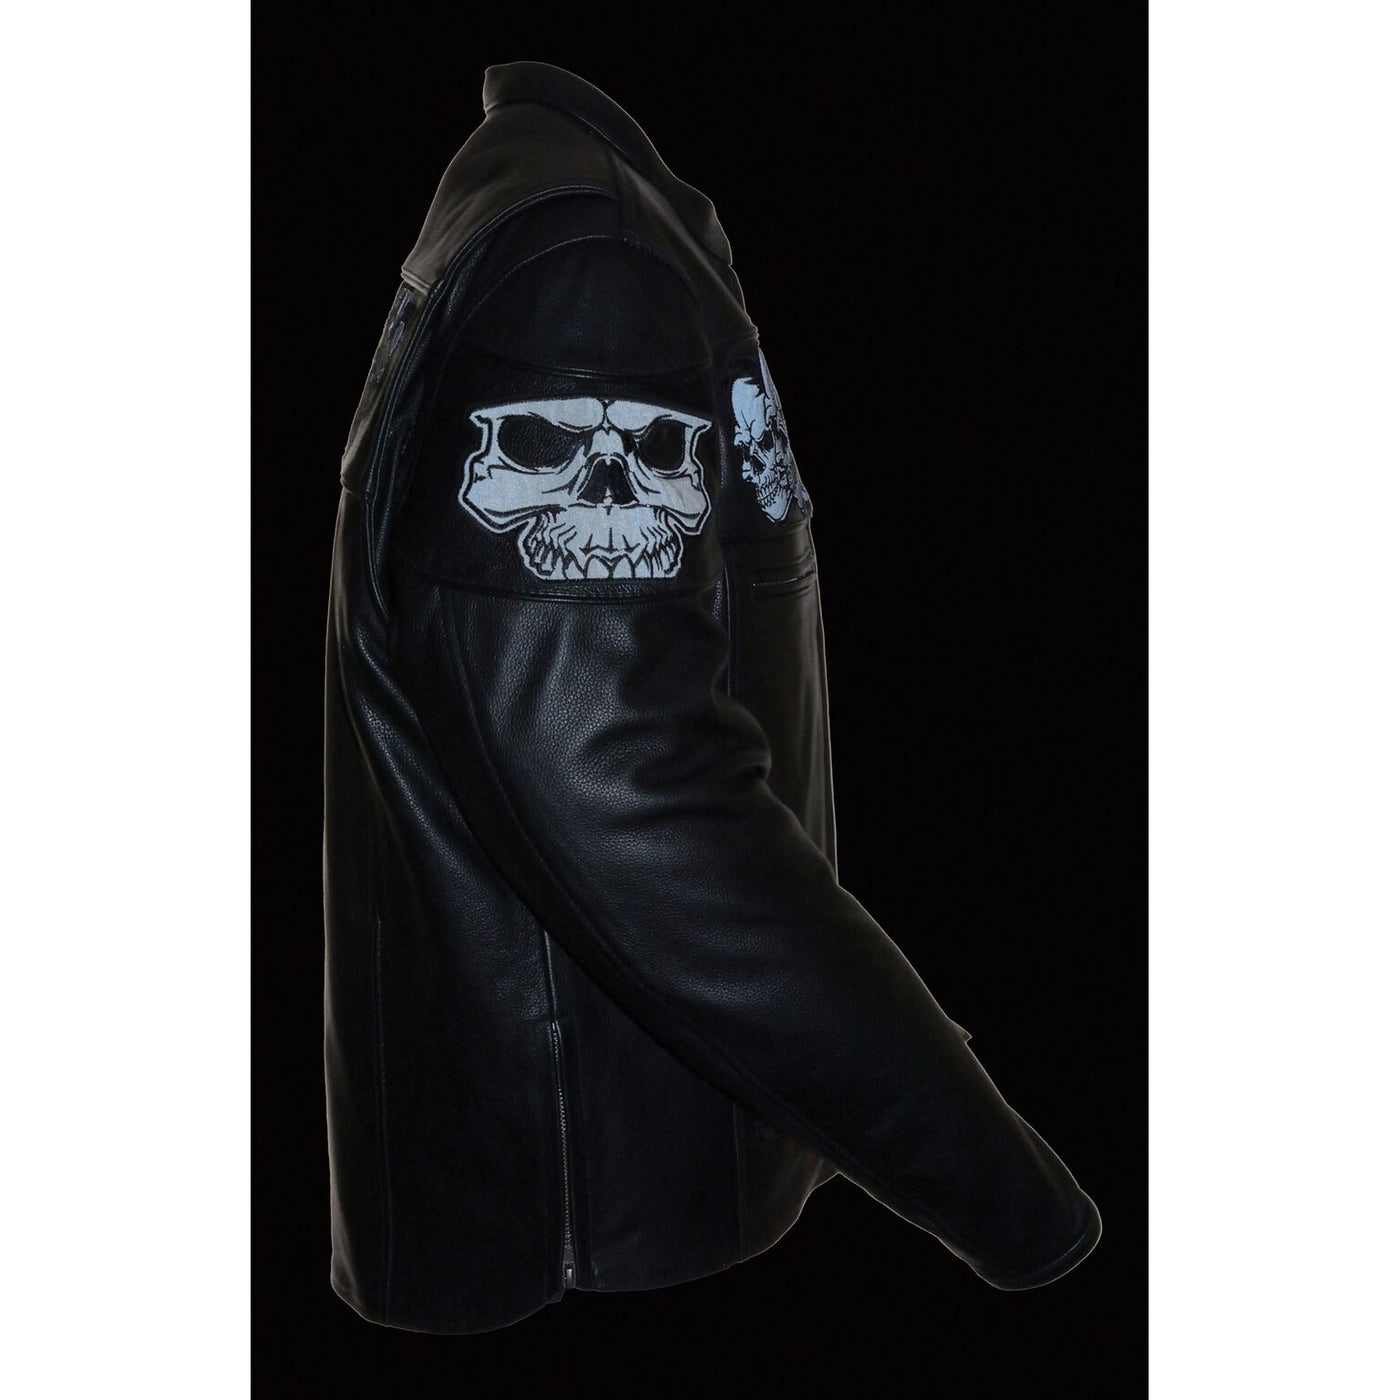 Night time reflective view of black leather riding jacket with skulls pictured around torso. View of side sleeves with skull reflection around upper arm. Sleeves have zippers and snaps at wrists. Available for purchase at our leather shop in Smyrna, TN, near Nashville.